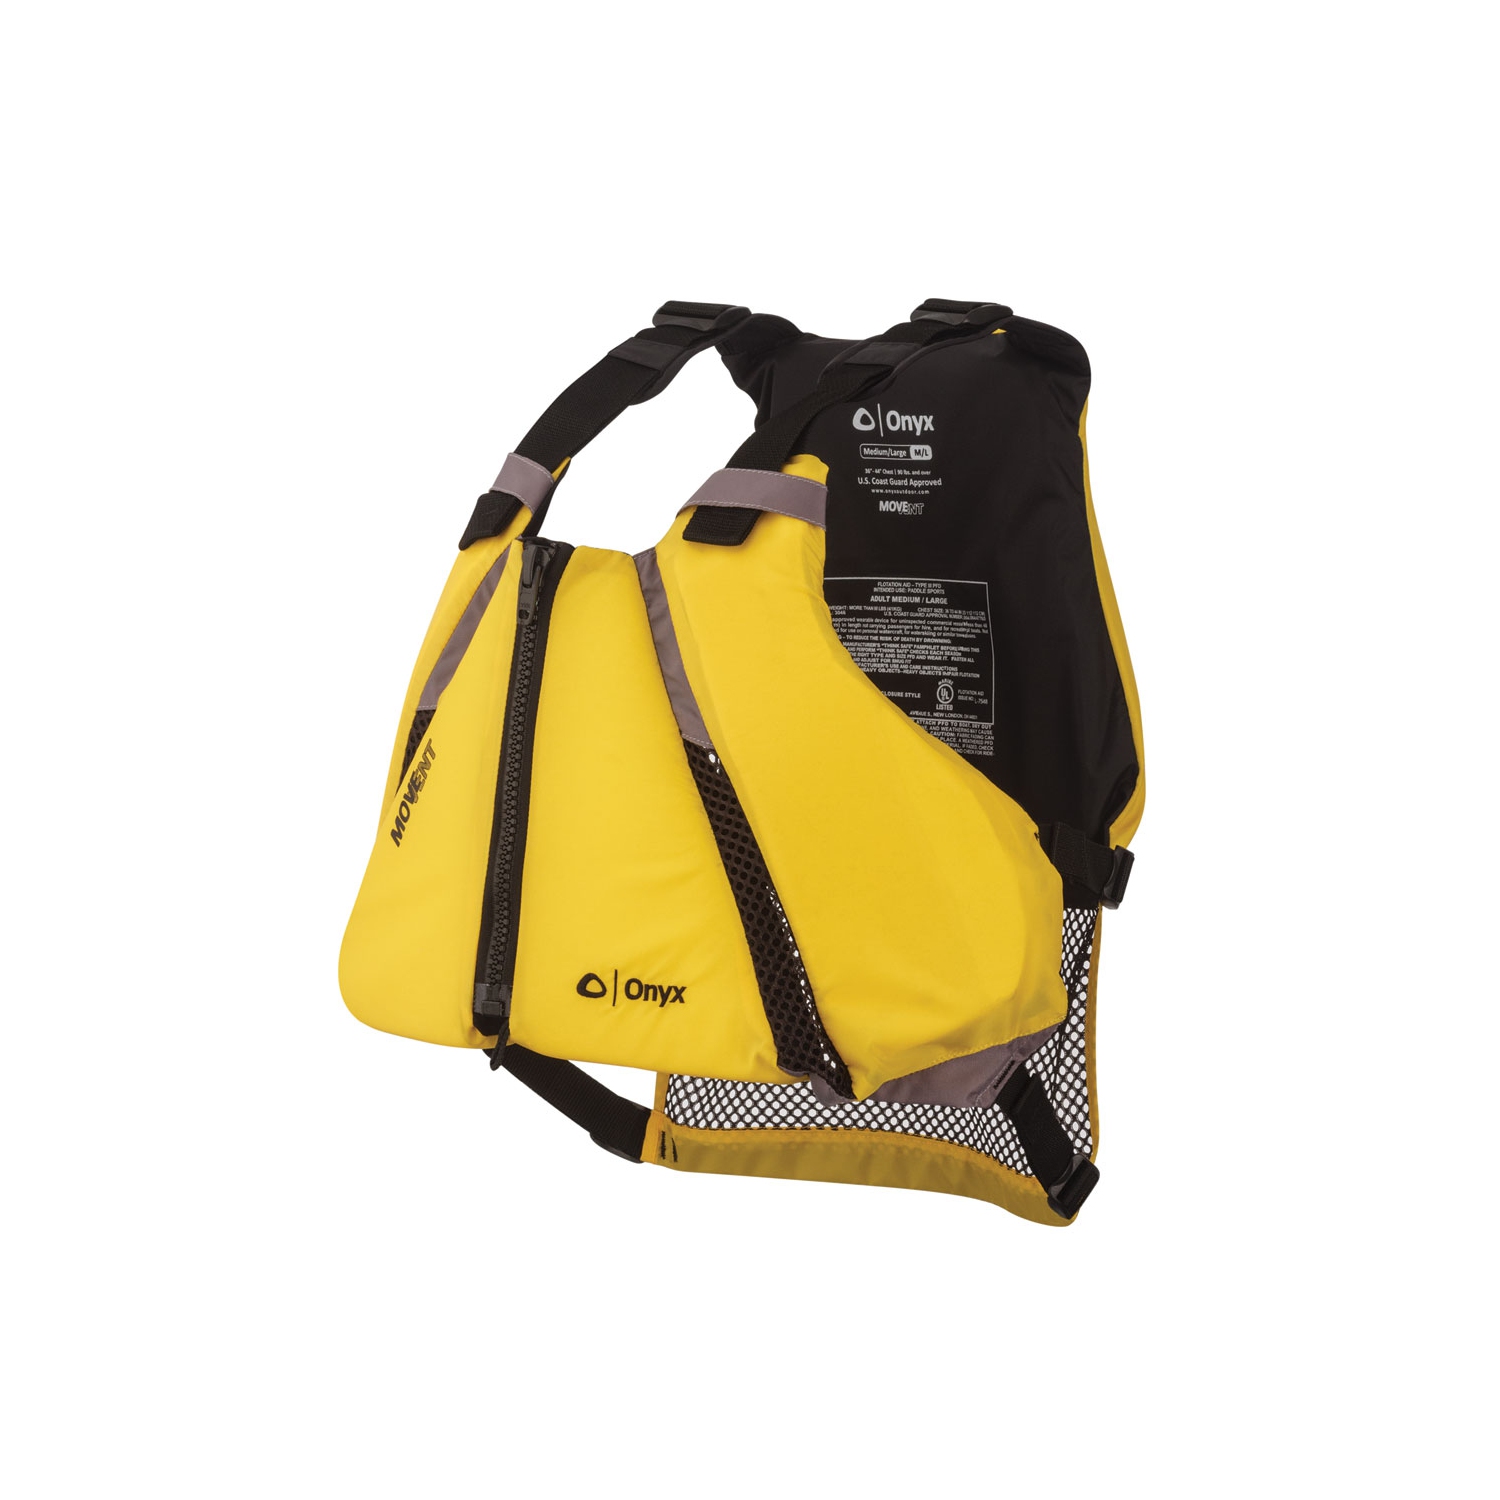 Onyx Outdoor 122000-300-020-14 Move Vent Curve Paddle Sports Life Vest -  Extra Small - Small